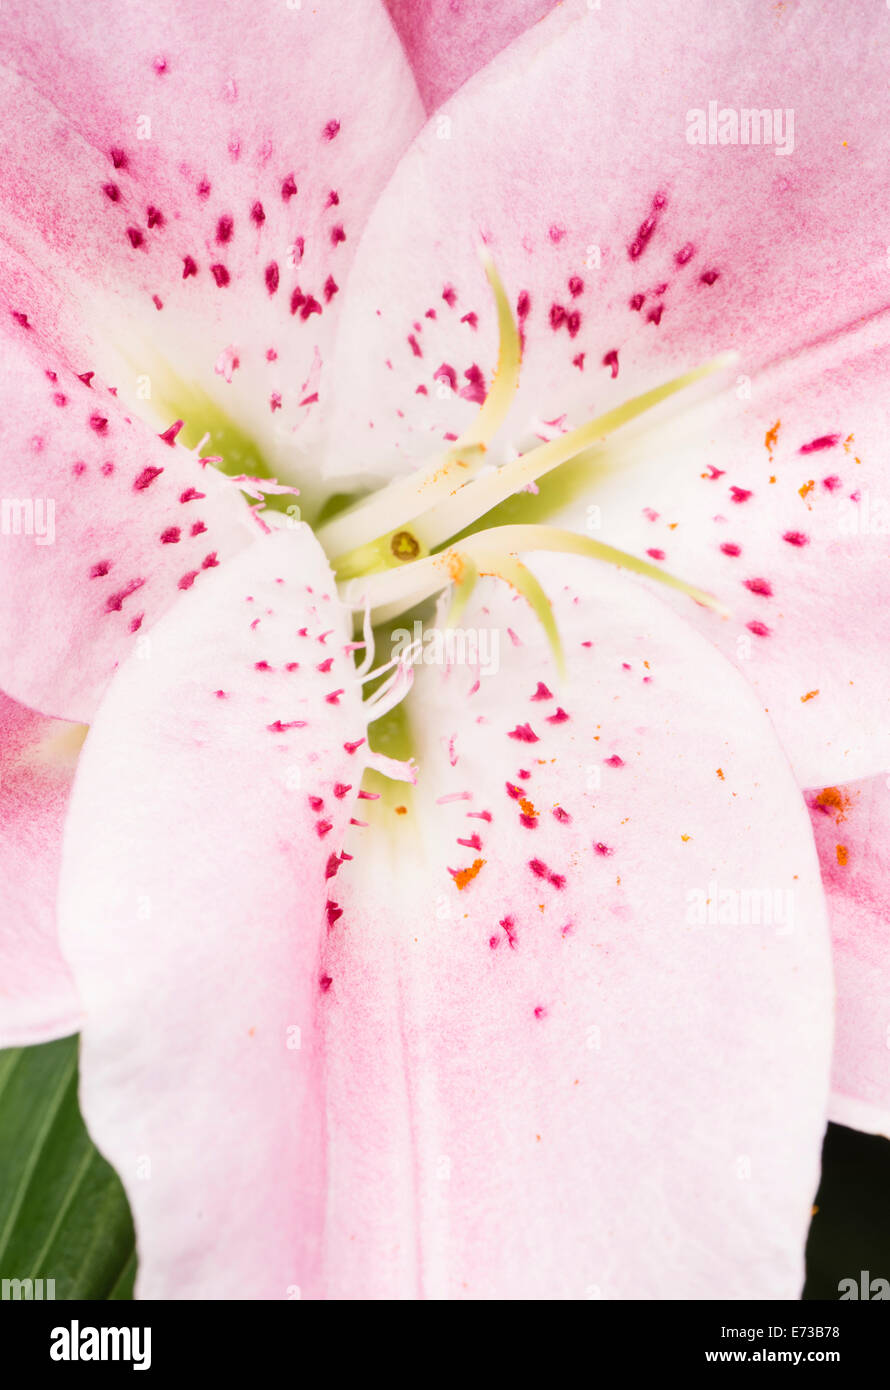 Macro shot of pink lily flower Stock Photo